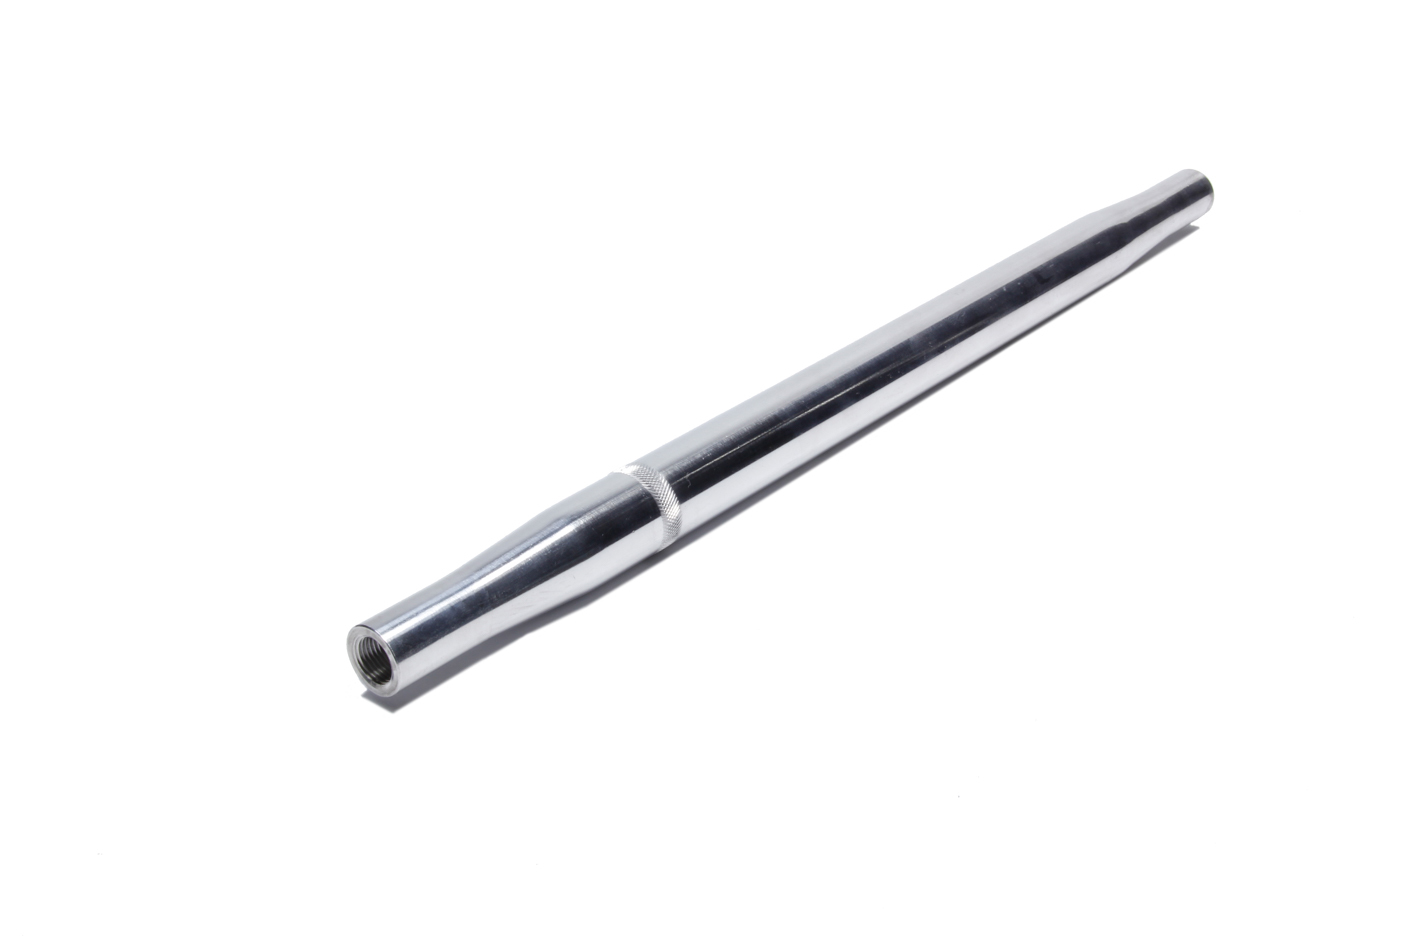 M AND W ALUMINUM PRODUCTS Swaged Rod 1.125in. x 23.5in. 5/8in. Thread P/N - SR-23.5L-POL